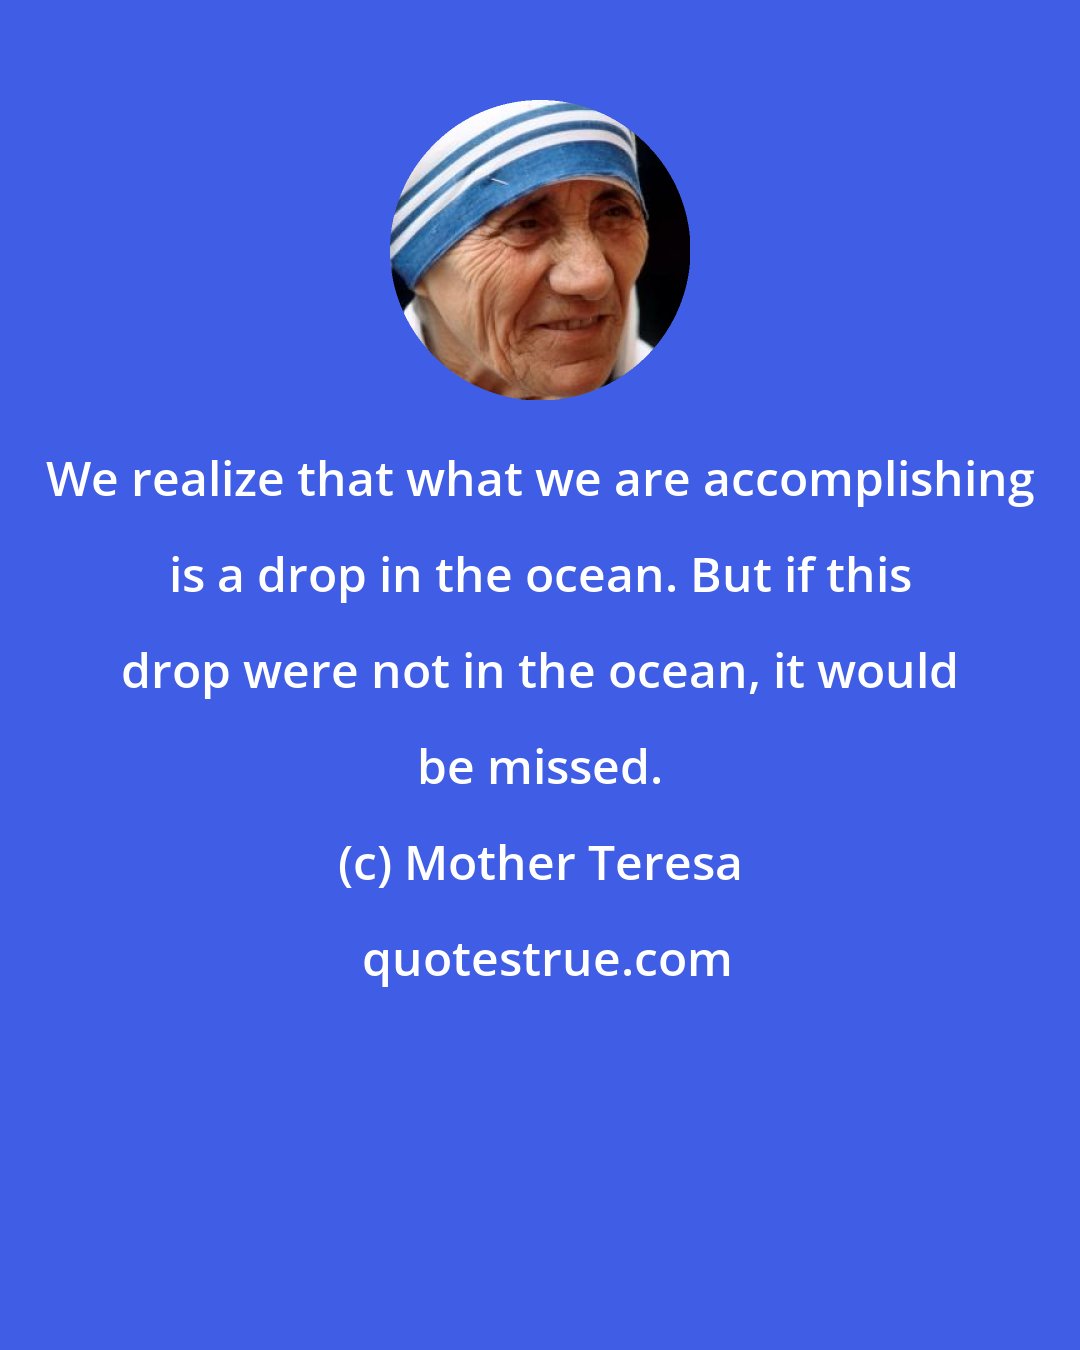 Mother Teresa: We realize that what we are accomplishing is a drop in the ocean. But if this drop were not in the ocean, it would be missed.